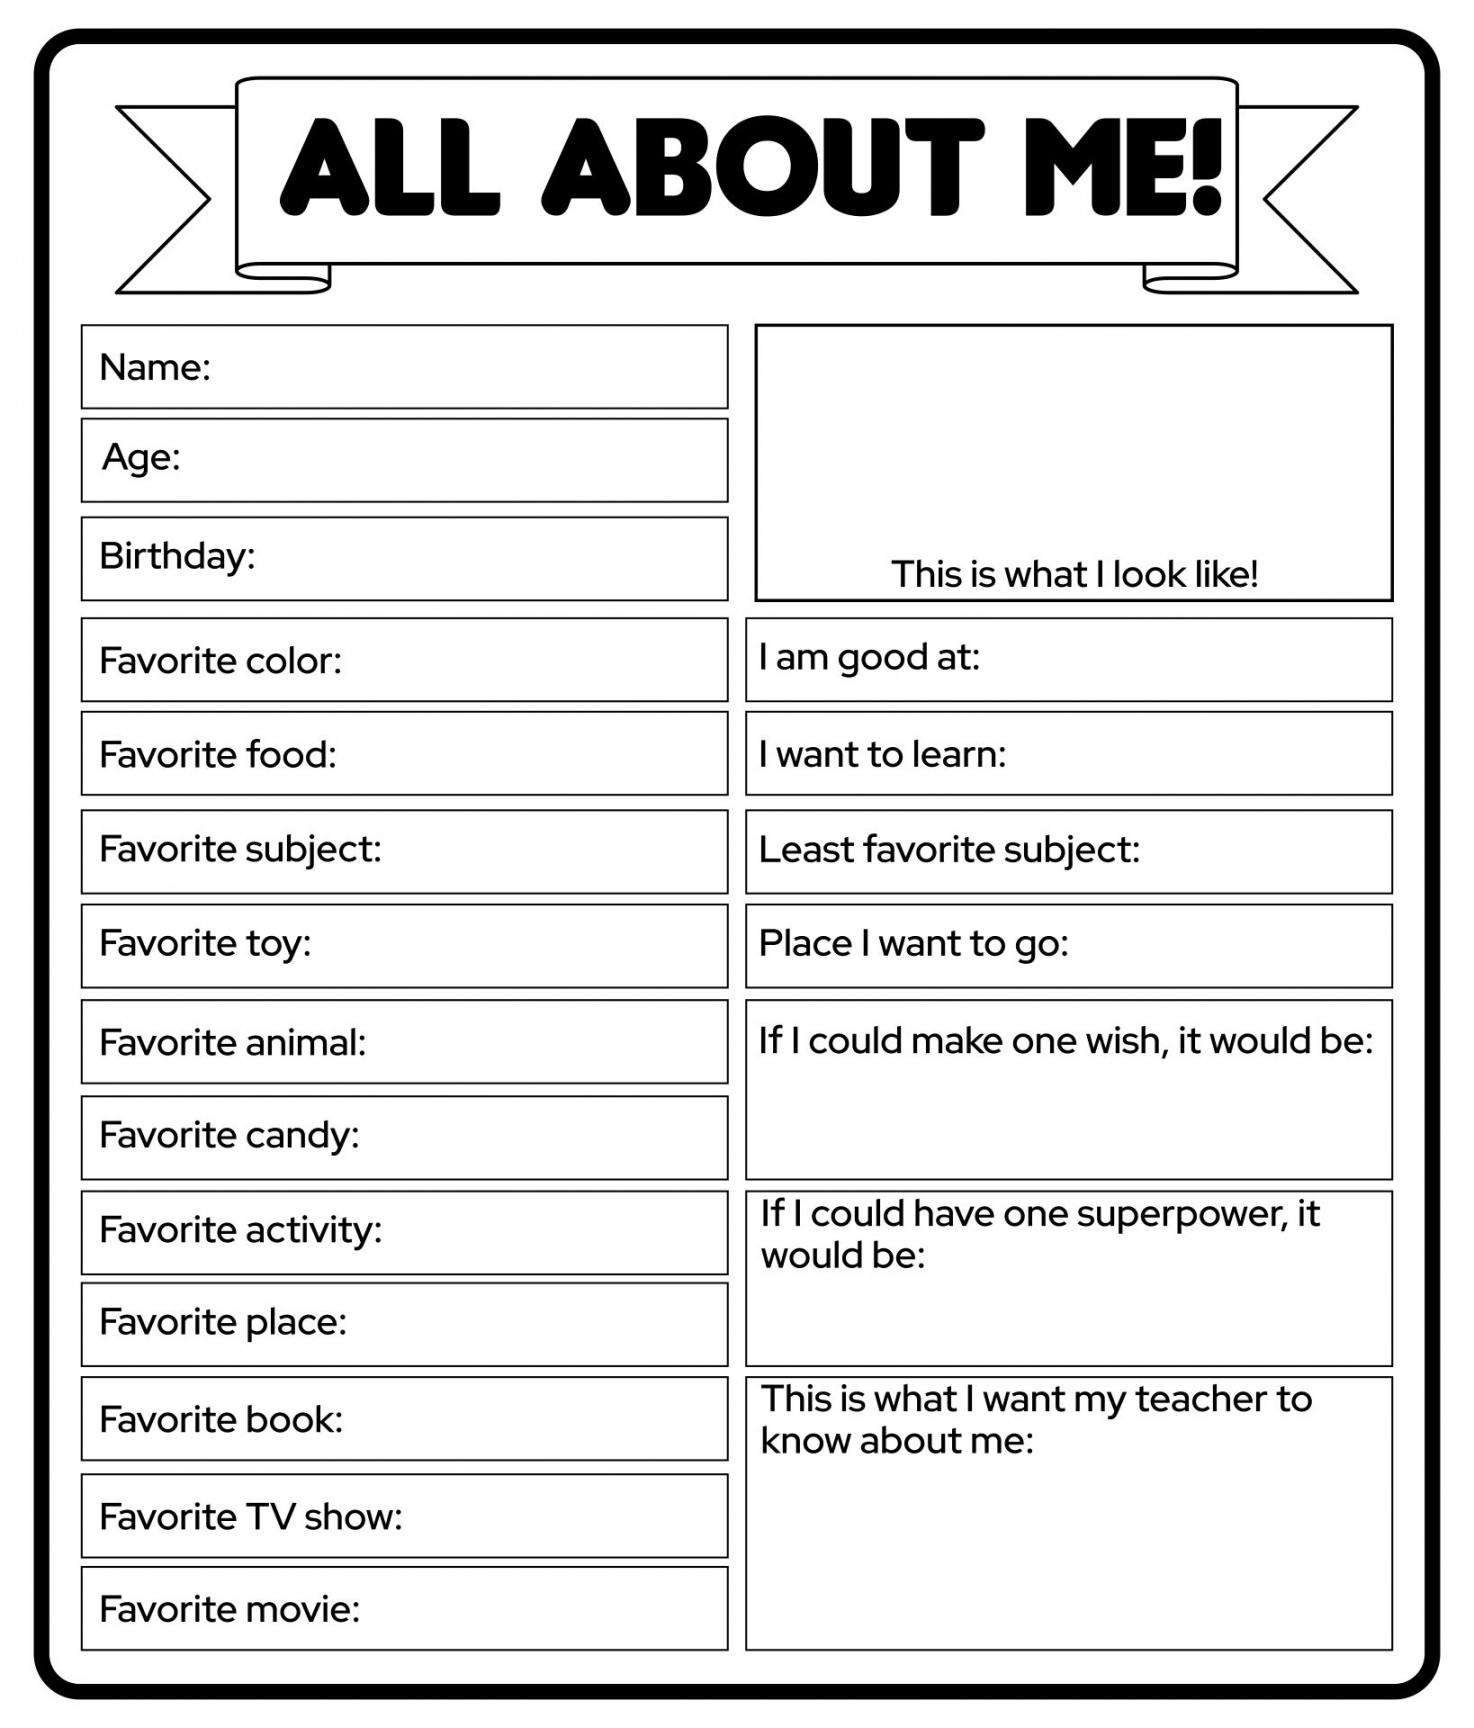 Best Free Printable All About Me Adult - printablee - Free Printable All About Me Worksheet For Adults